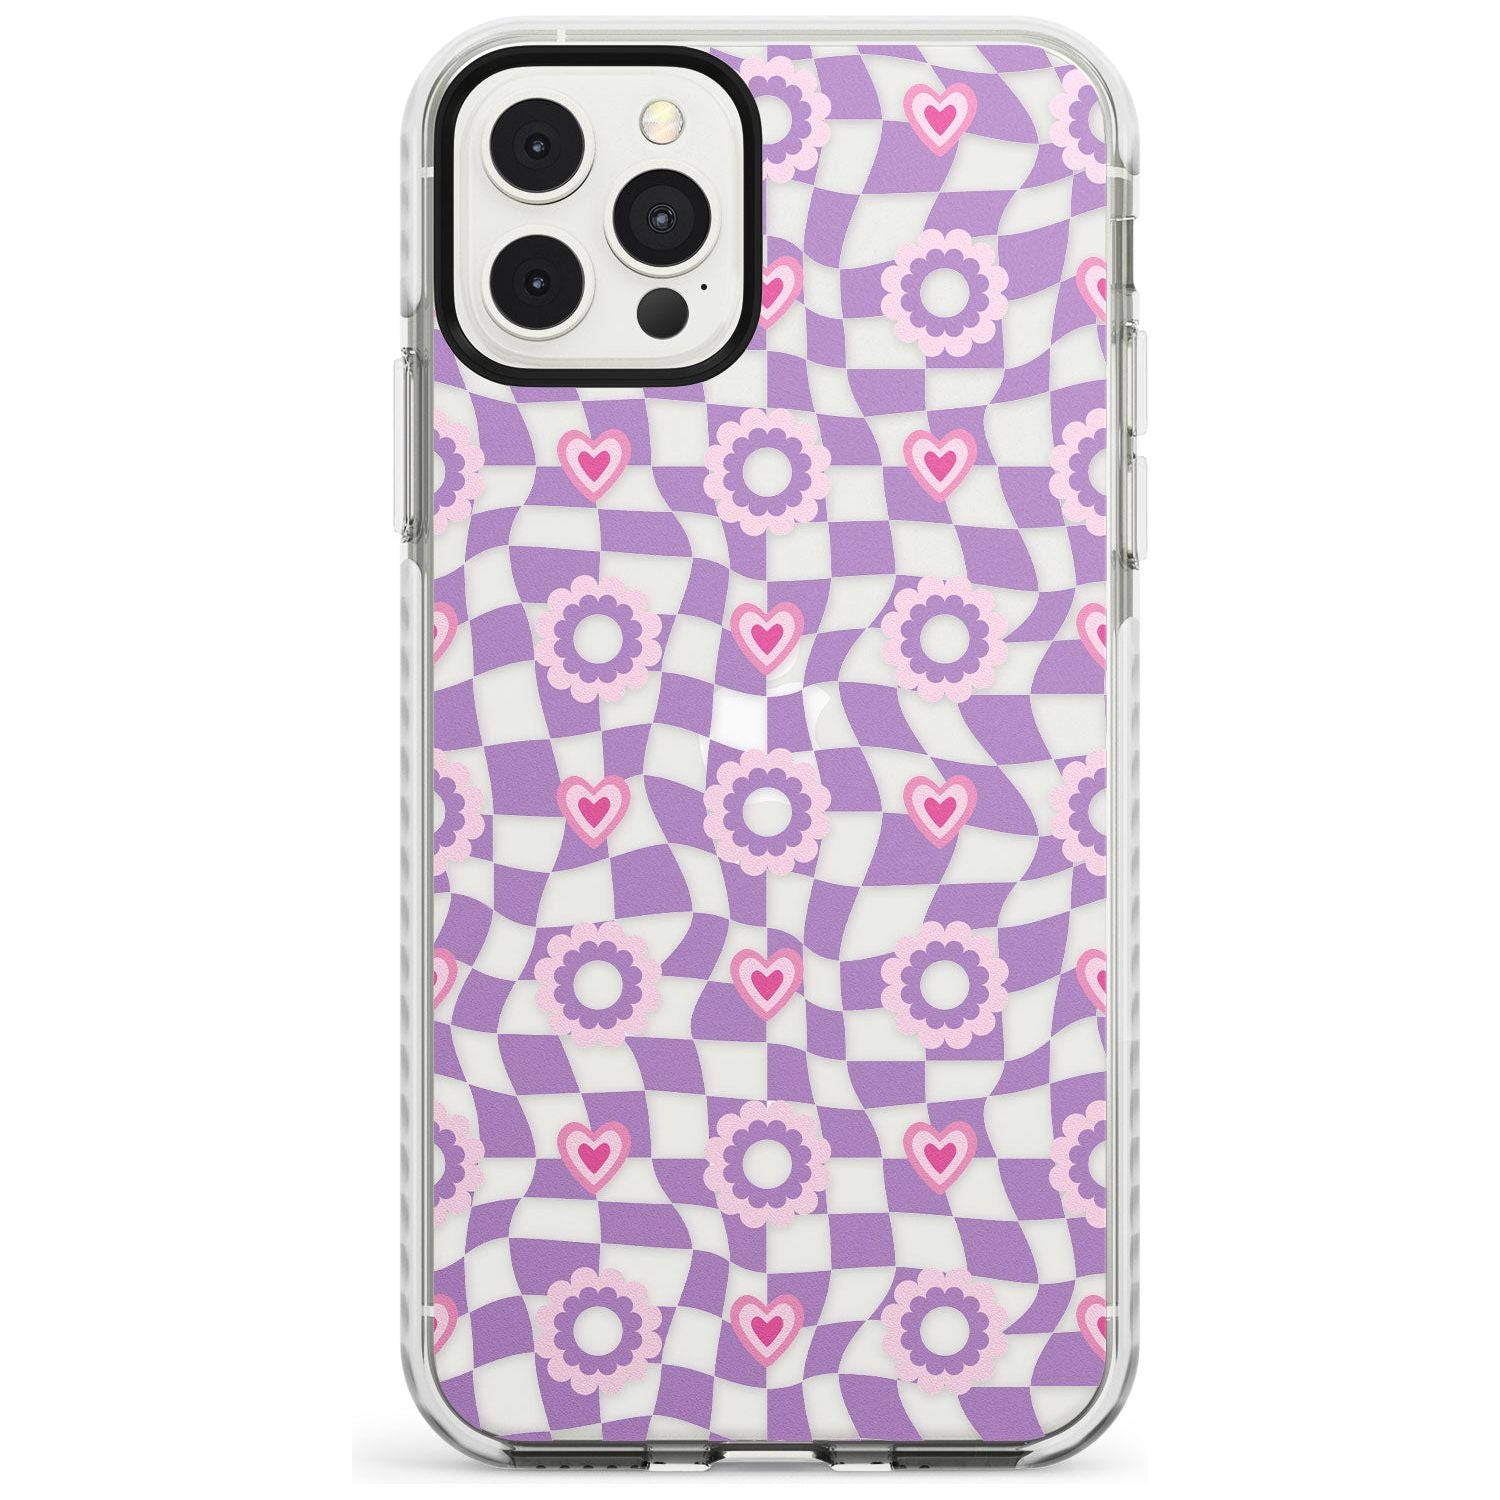 Checkered Love Pattern Impact Phone Case for iPhone 11 Pro Max